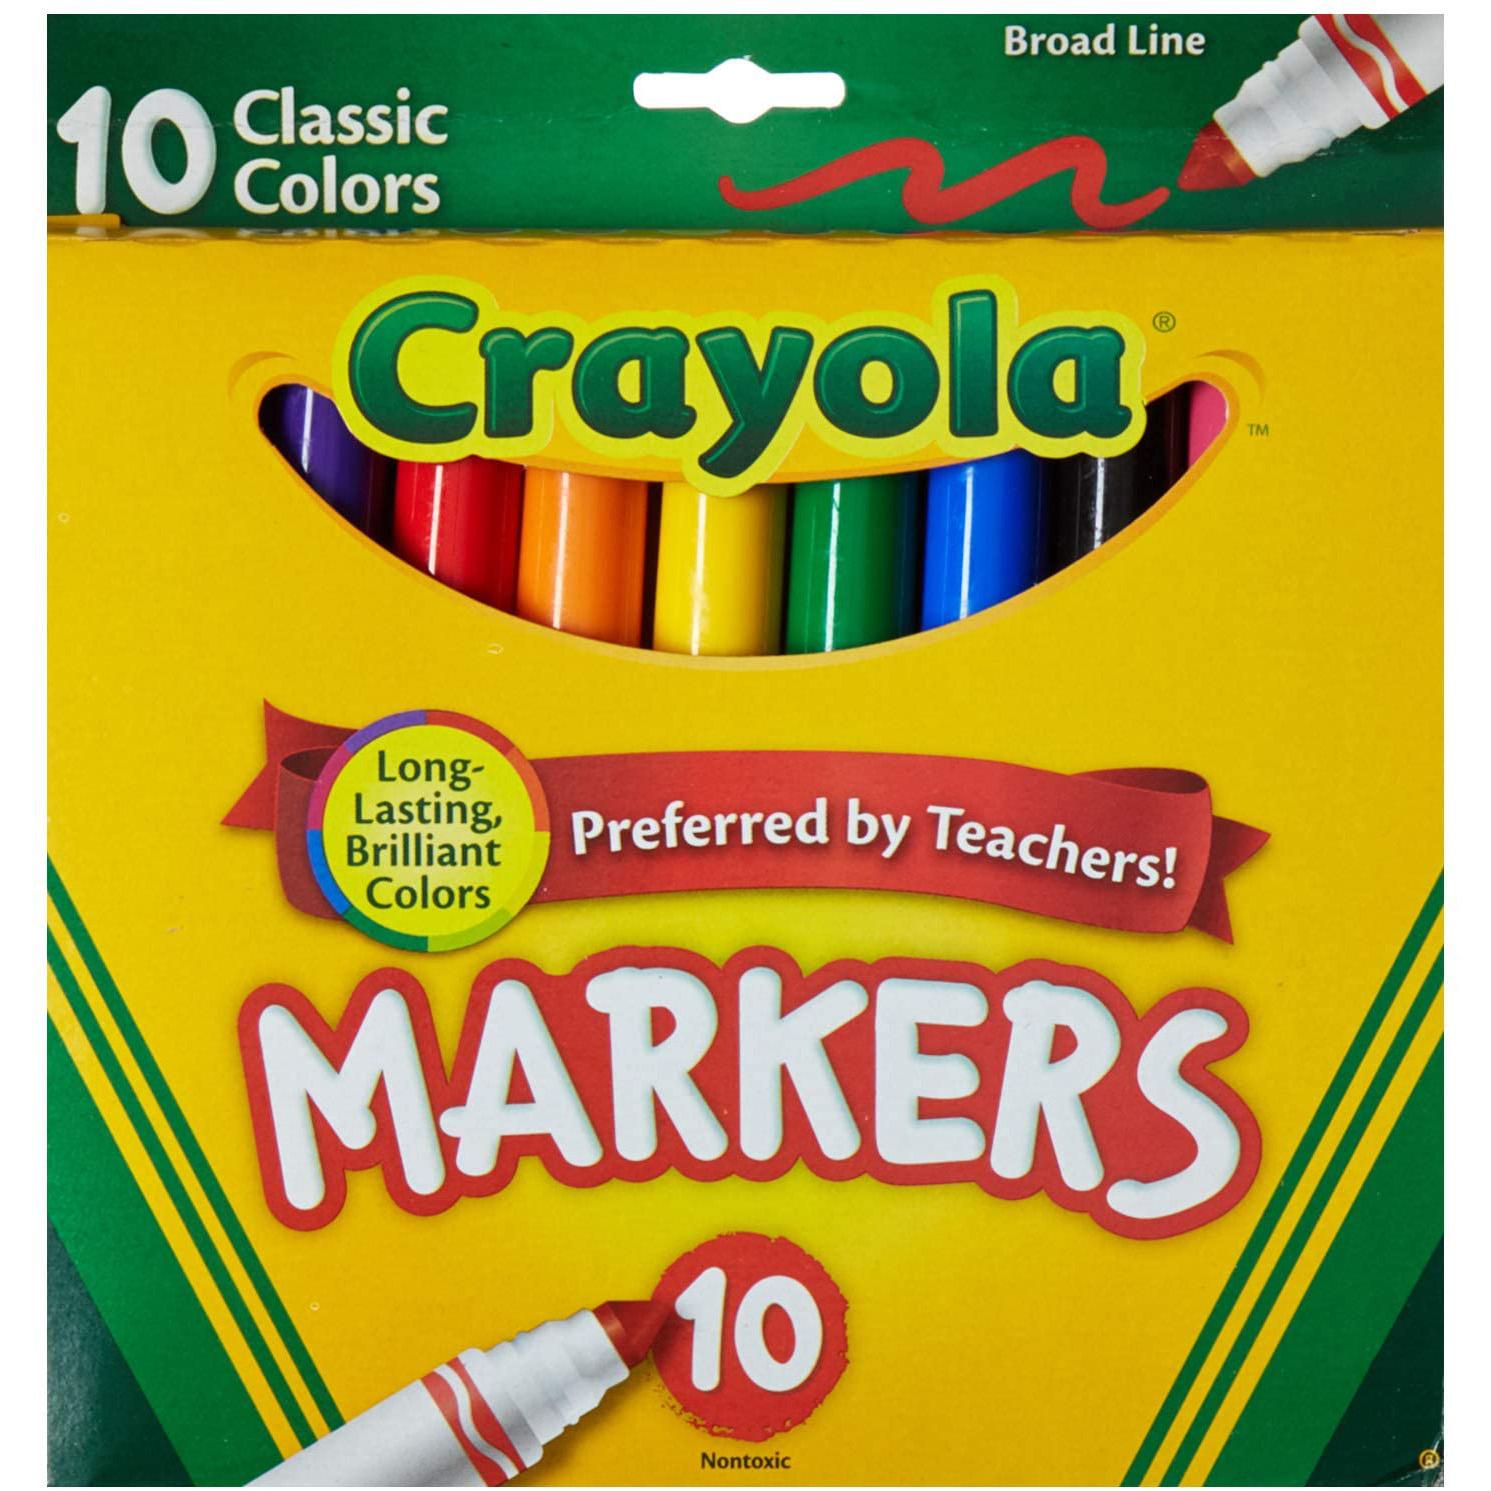 Crayola 10 Colors Marker Set for $0.97 for $0.97